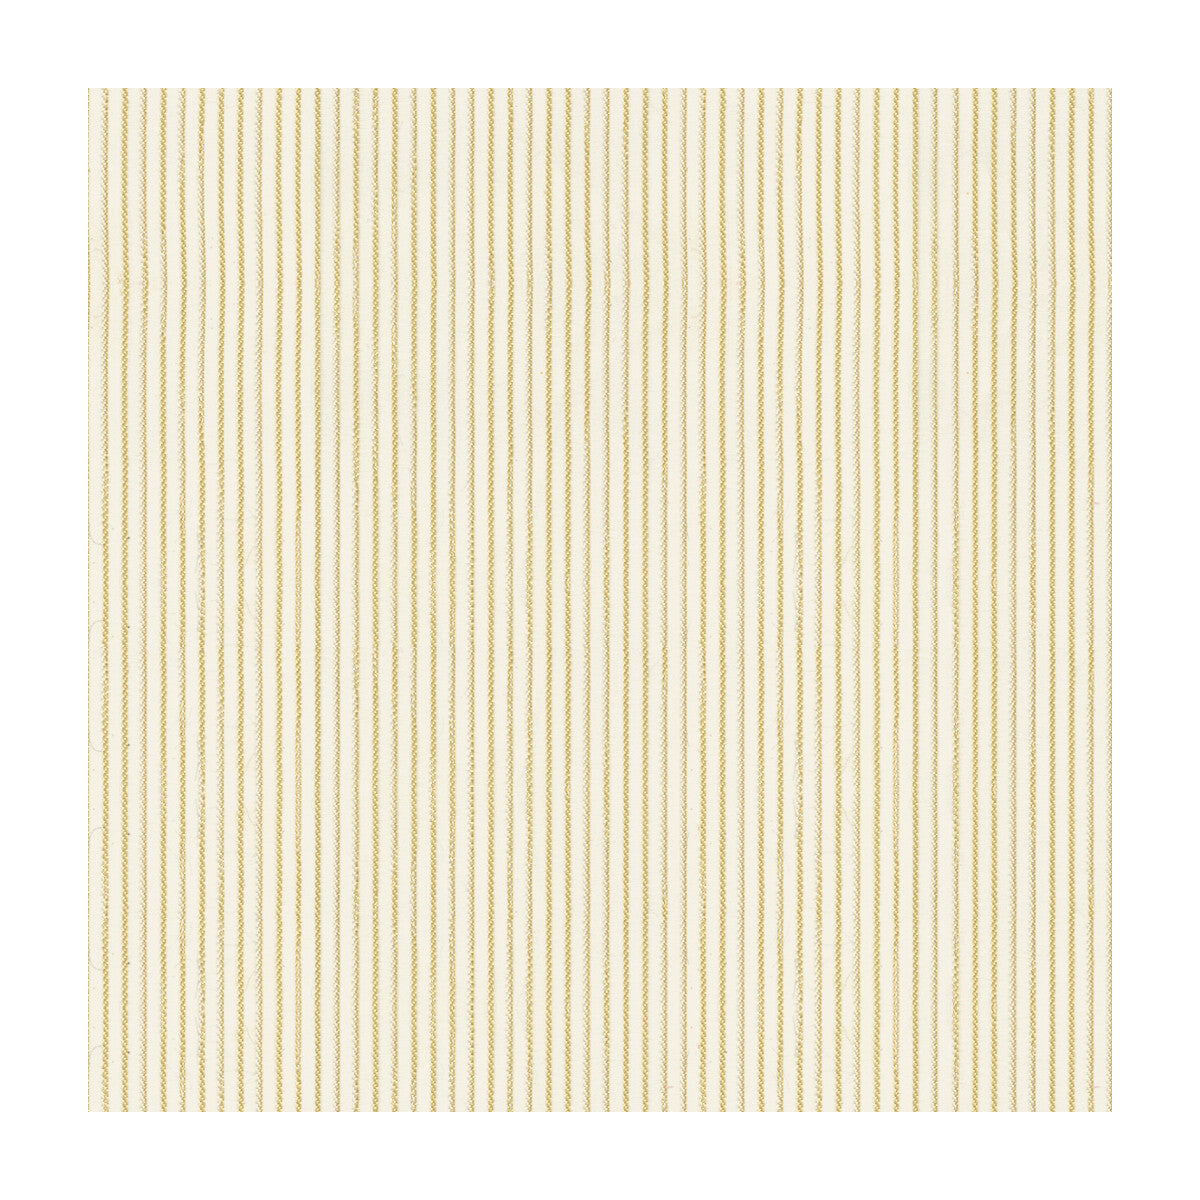 Kravet Contract fabric in 4138-16 color - pattern 4138.16.0 - by Kravet Contract